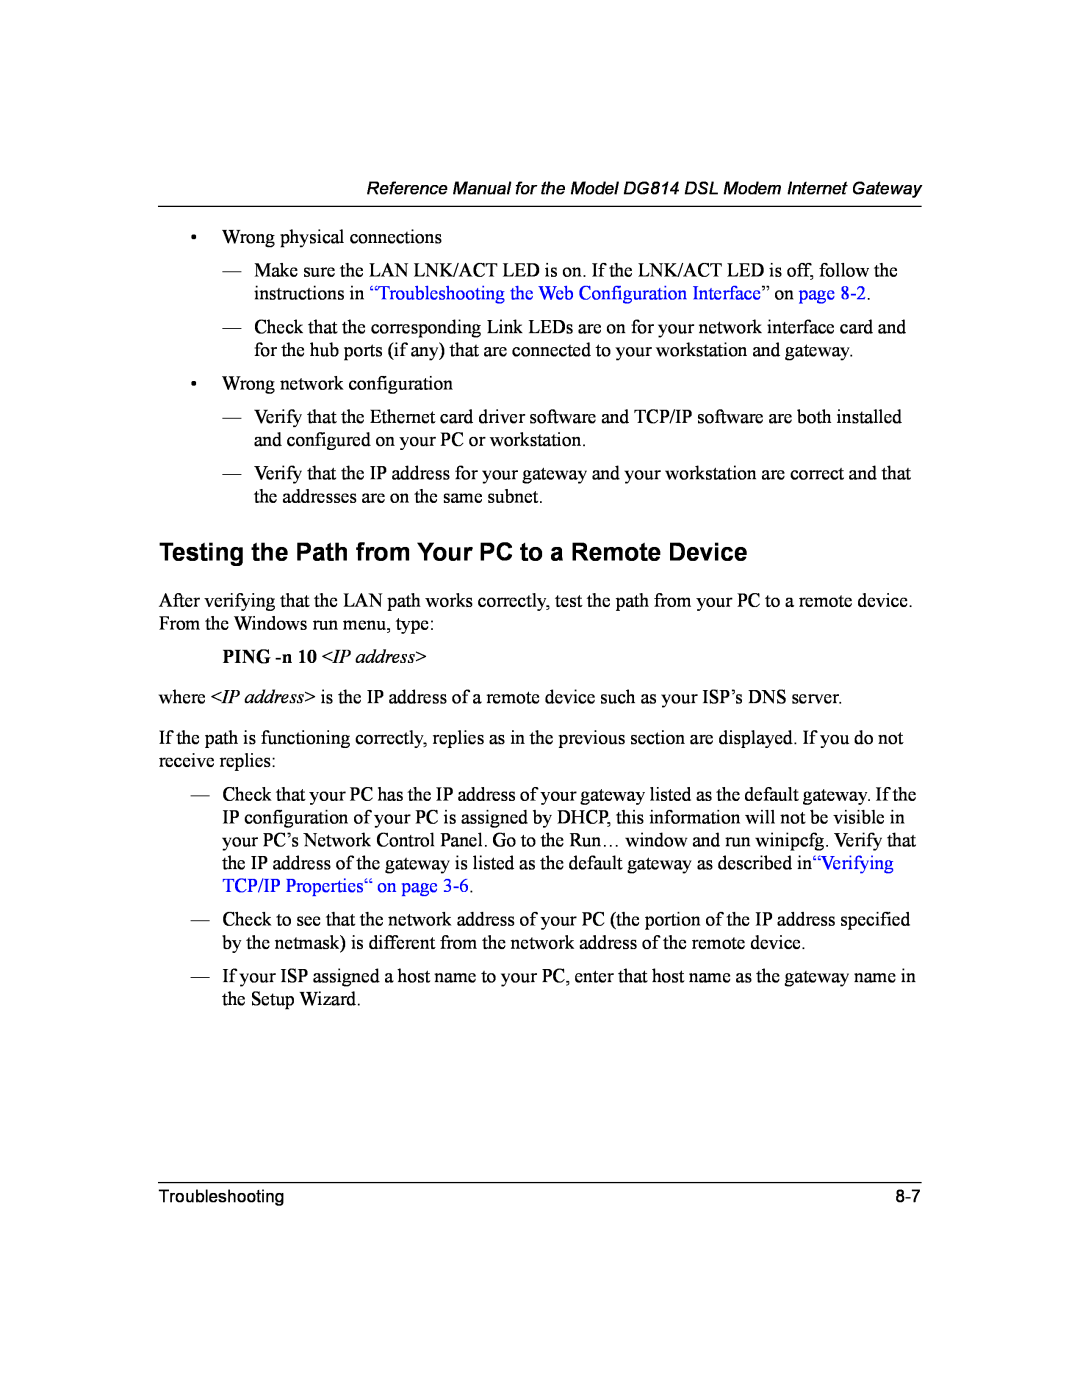 NETGEAR DG814 DSL manual Testing the Path from Your PC to a Remote Device, PING -n 10 IP address 